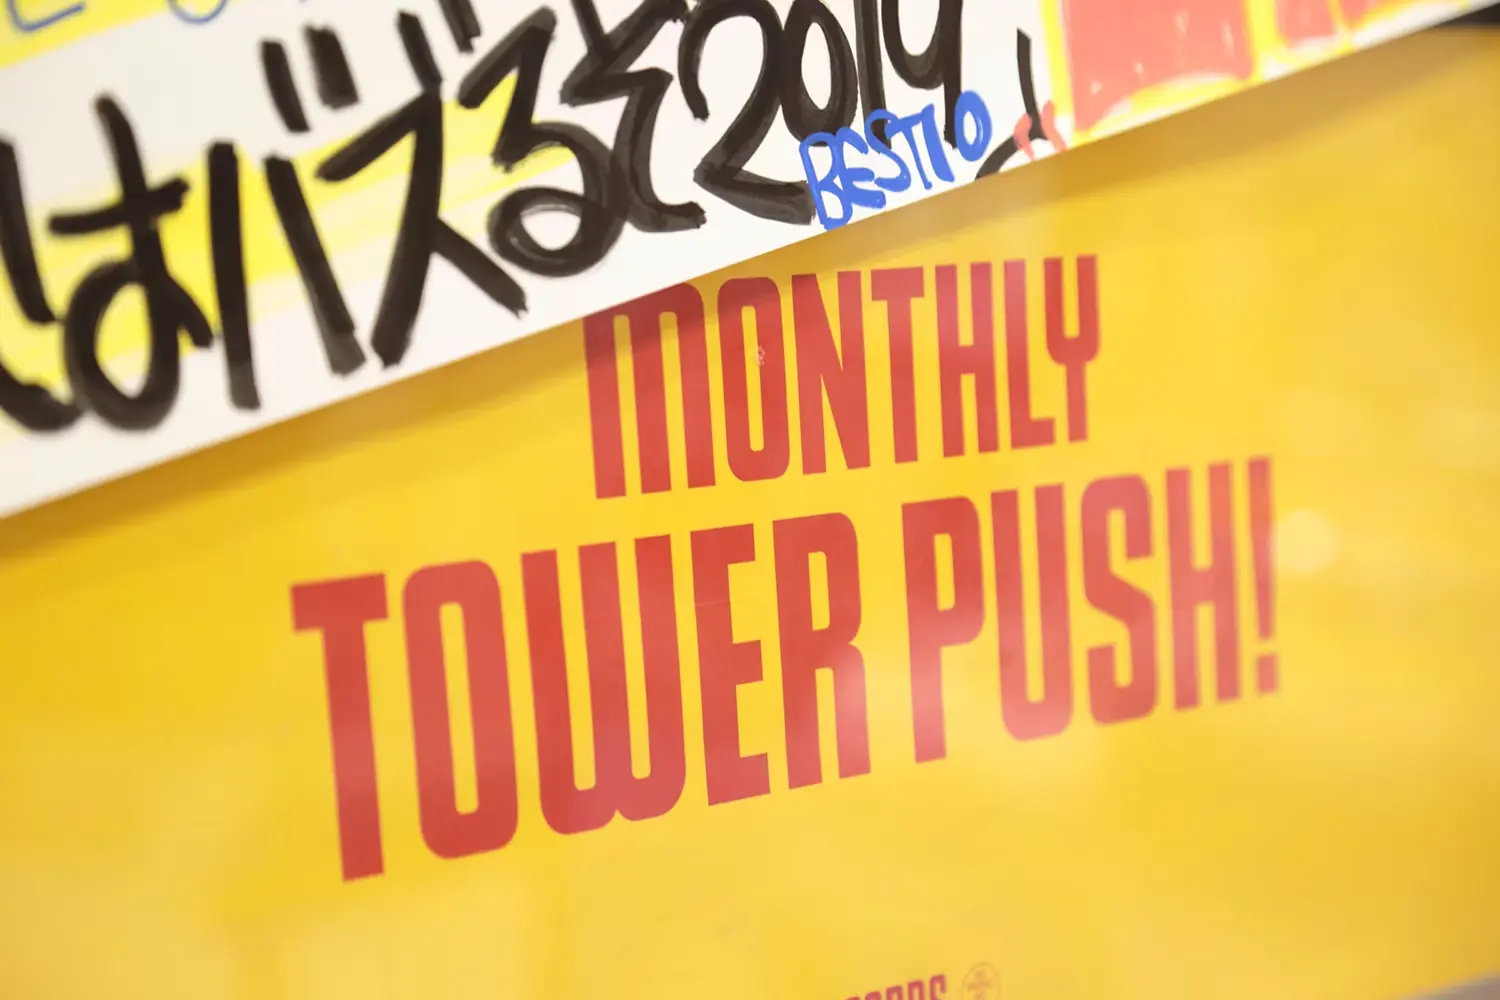 monthly tower push!